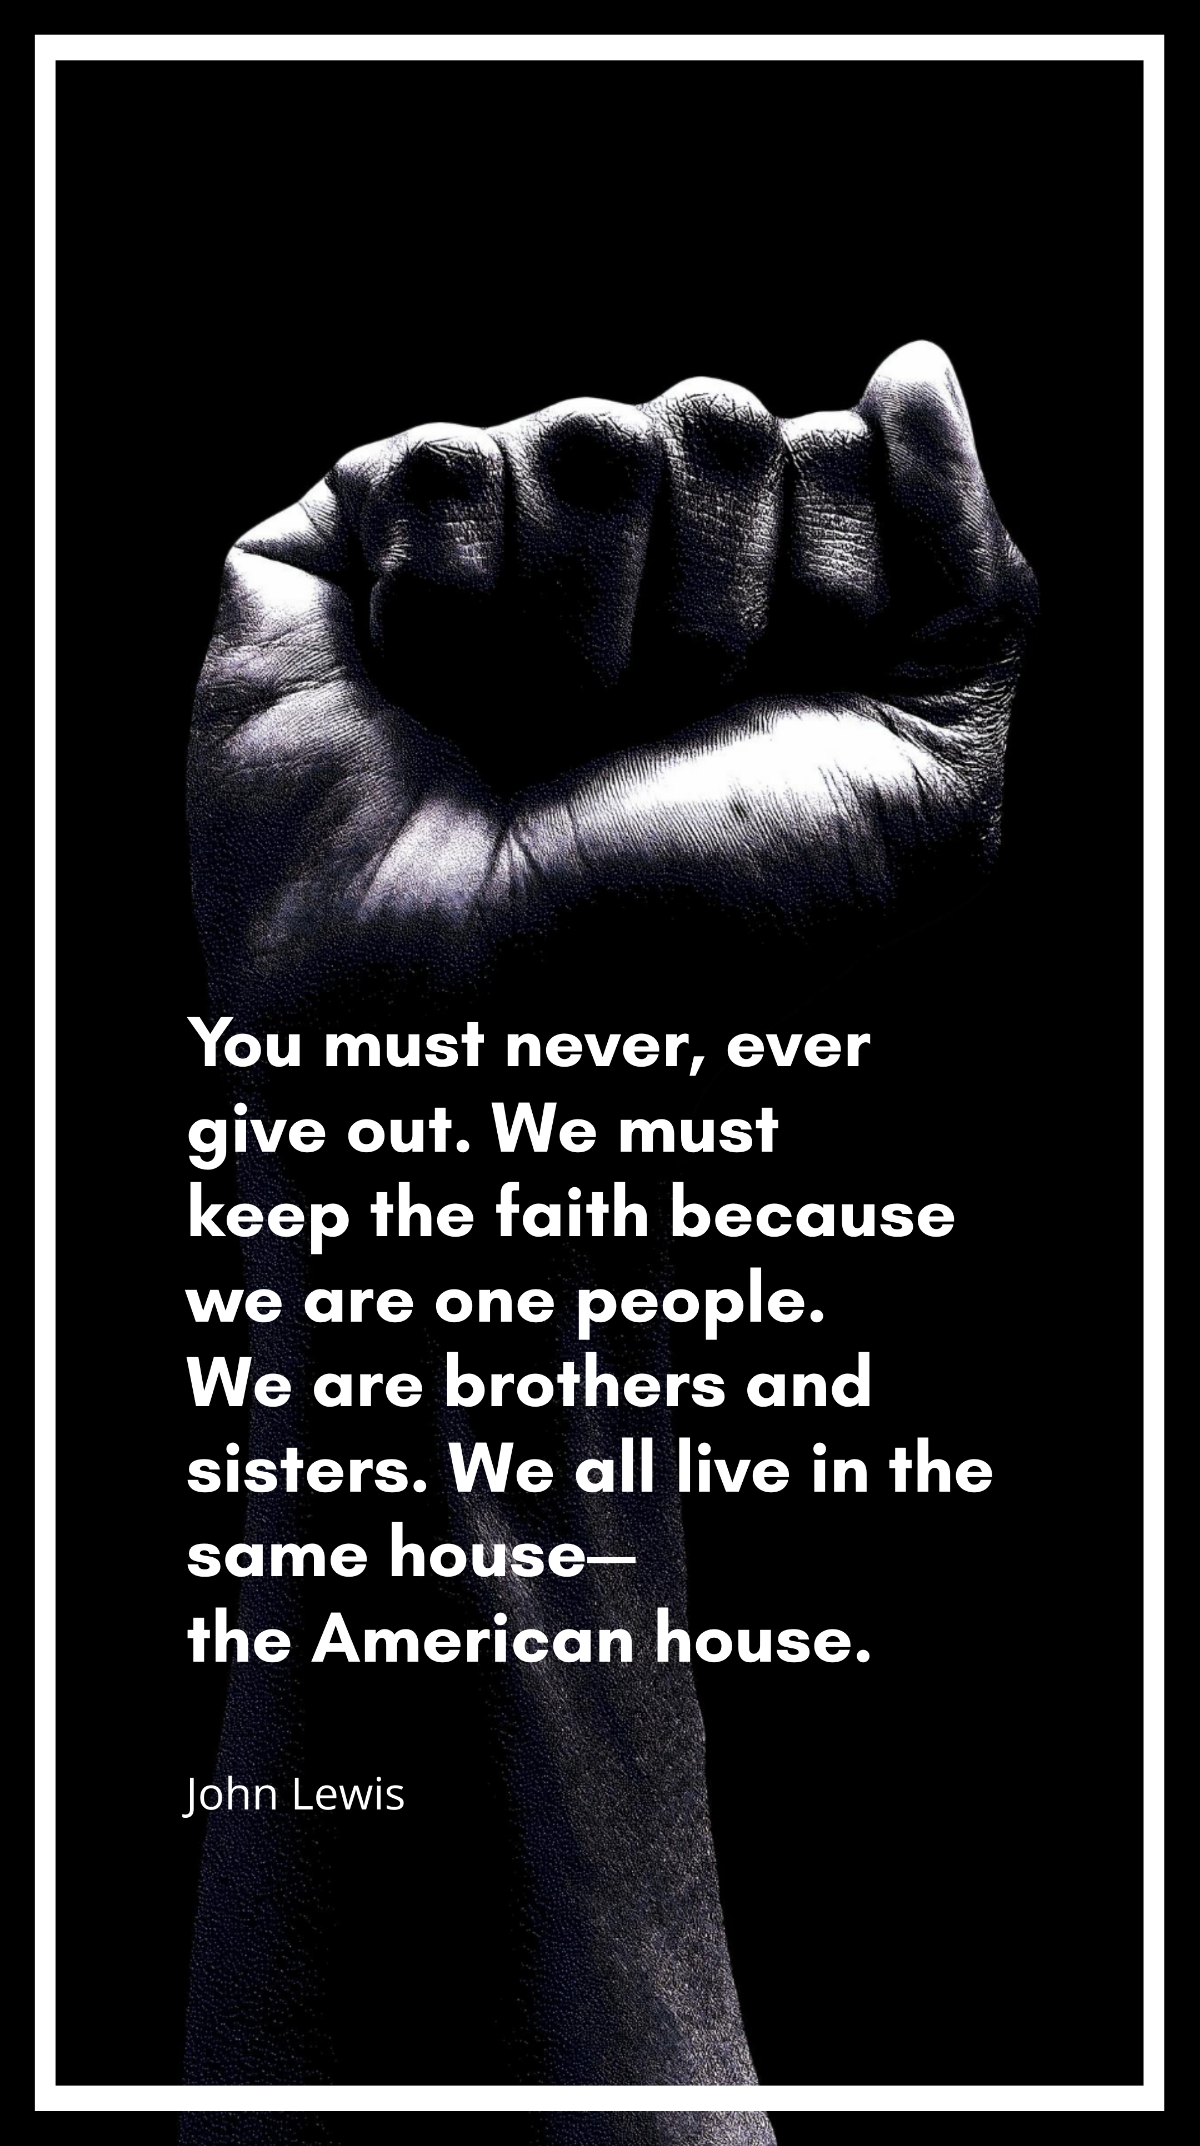 John Lewis - You must never, ever give out. We must keep the faith because we are one people. We are brothers and sisters. We all live in the same house—the American house.